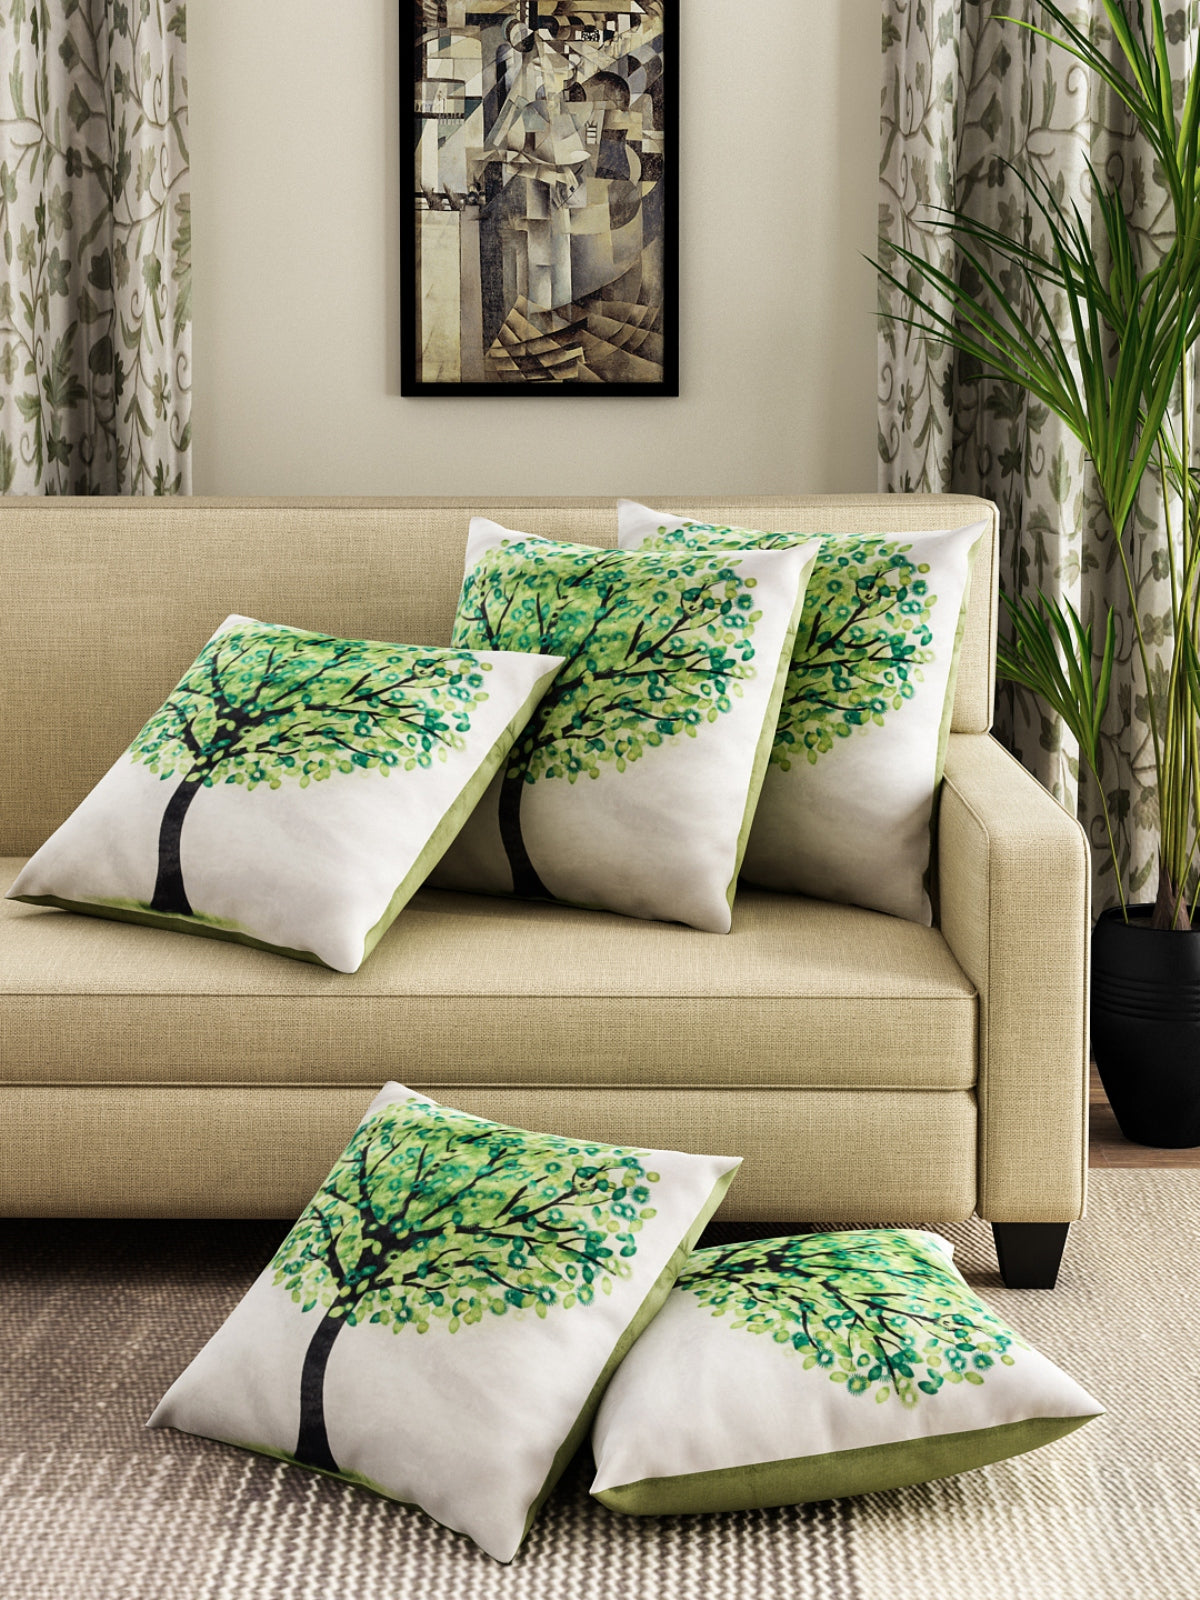 Soft Velvet Nature Tree Print Throw Pillow/Cushion Covers Set of 5, 16x16 inches - Silver & Green